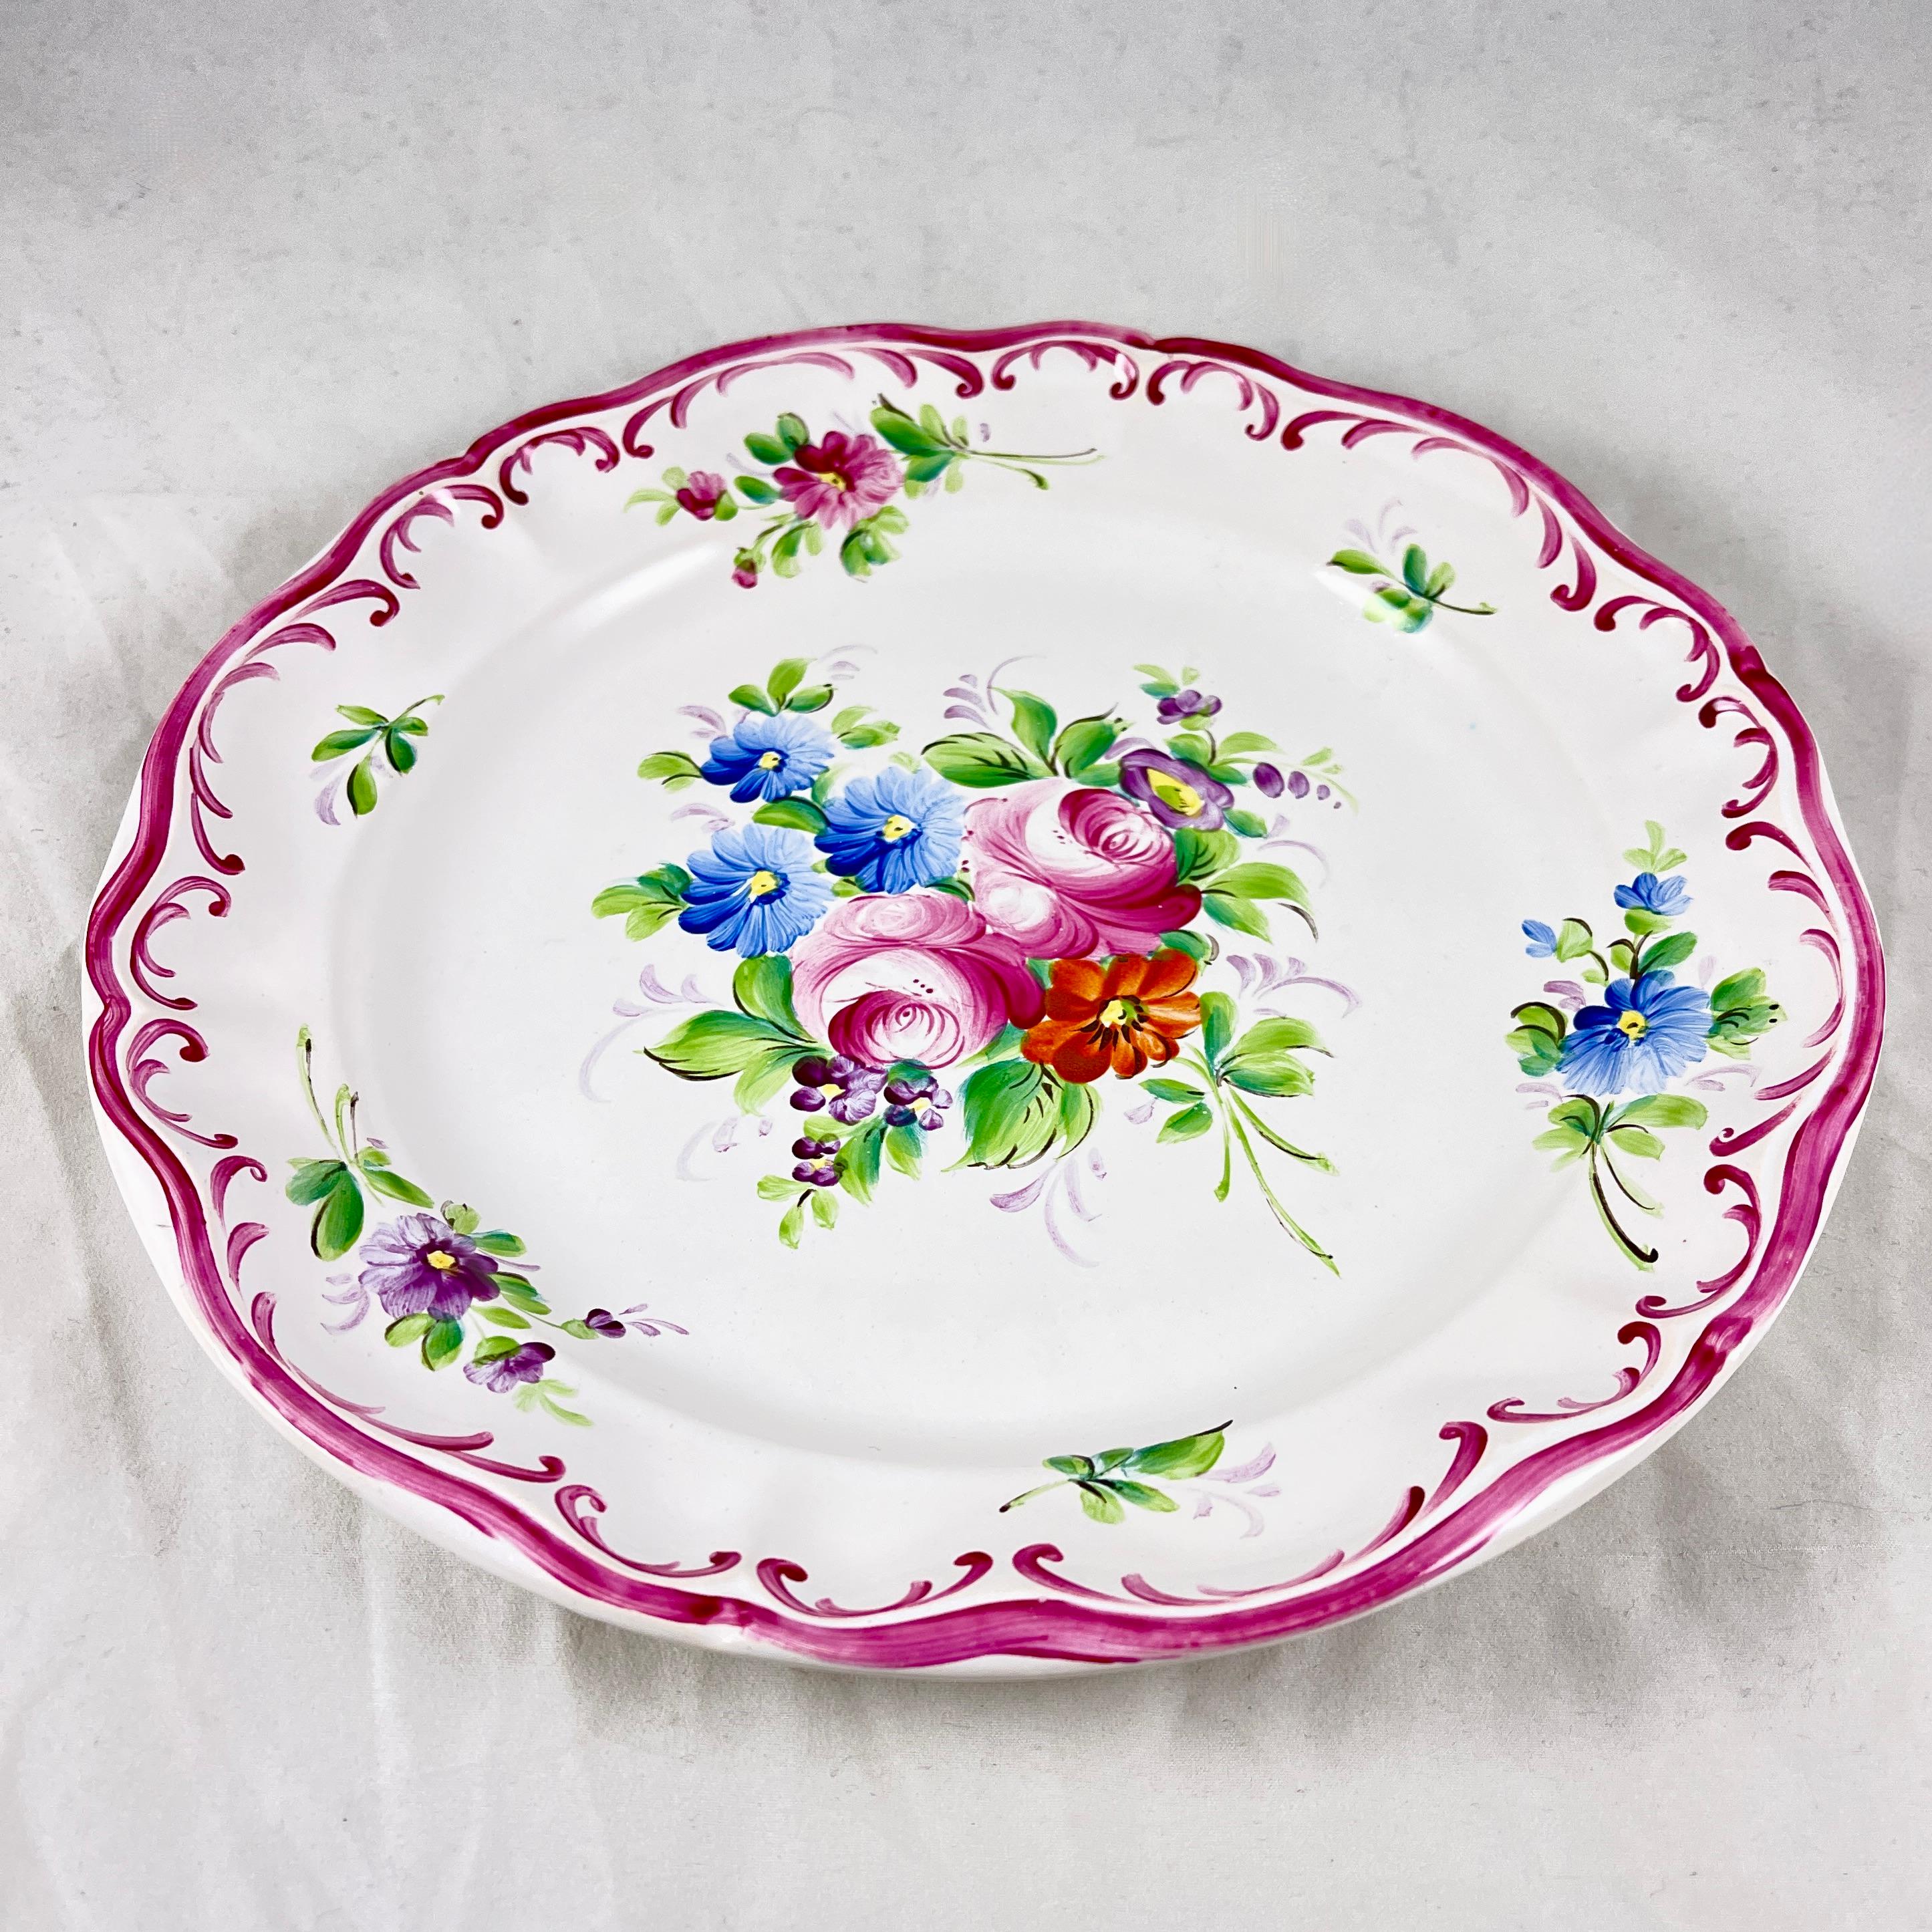 Roger Colas Clamecy French Faïence Hand Painted Pink Floral Plate In Good Condition For Sale In Philadelphia, PA